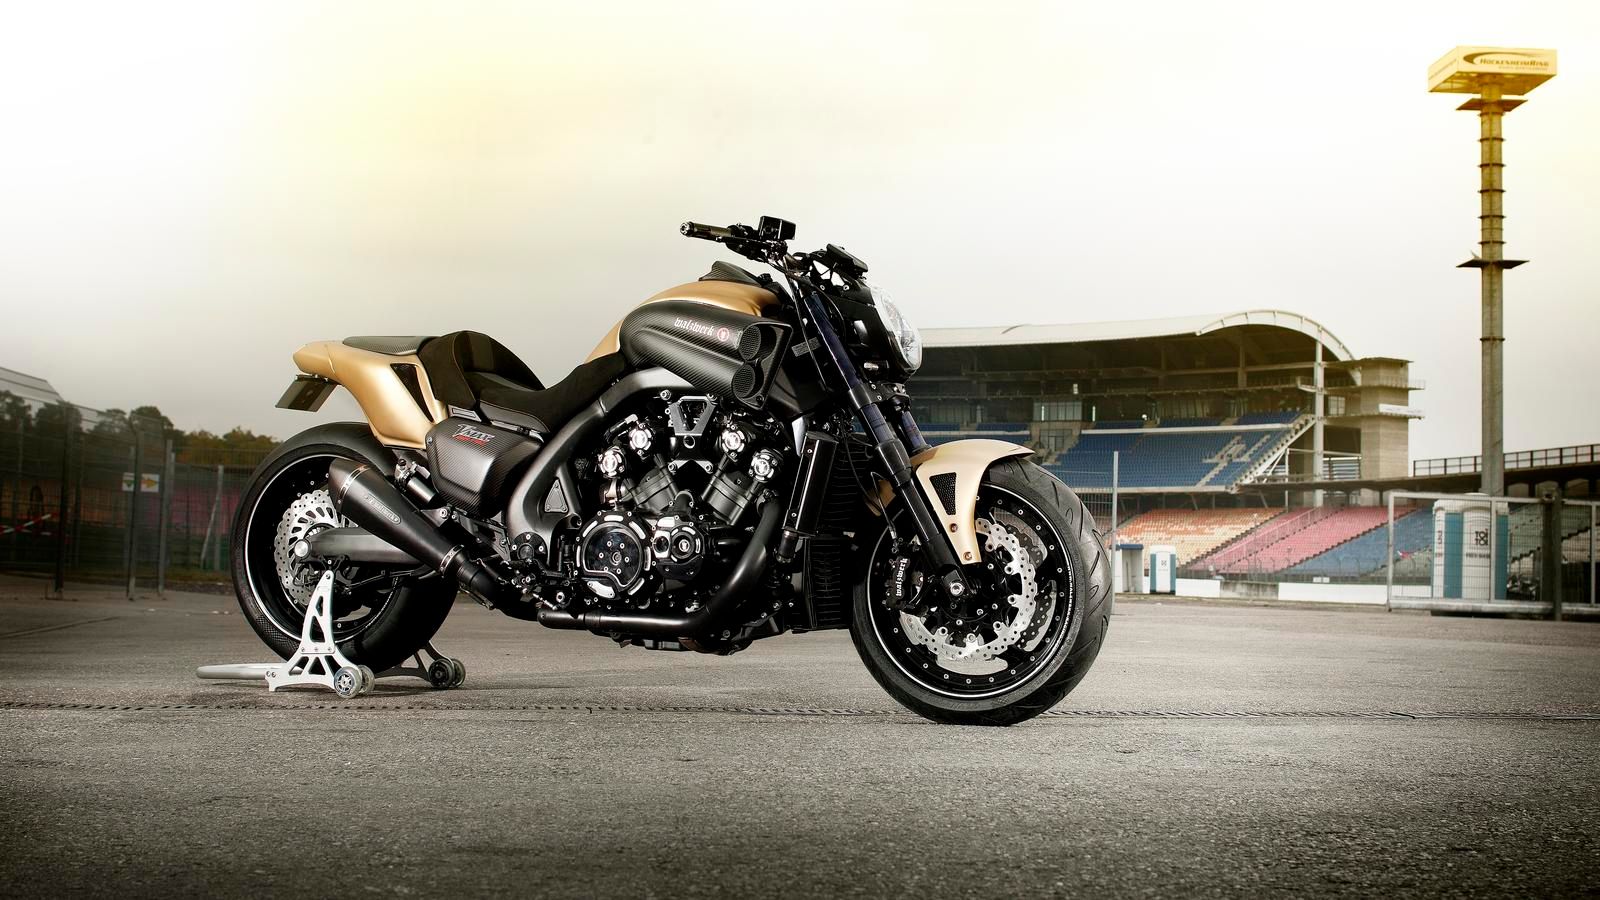 2012 Yamaha V-MAX Hyper Modified by Marcus Walz